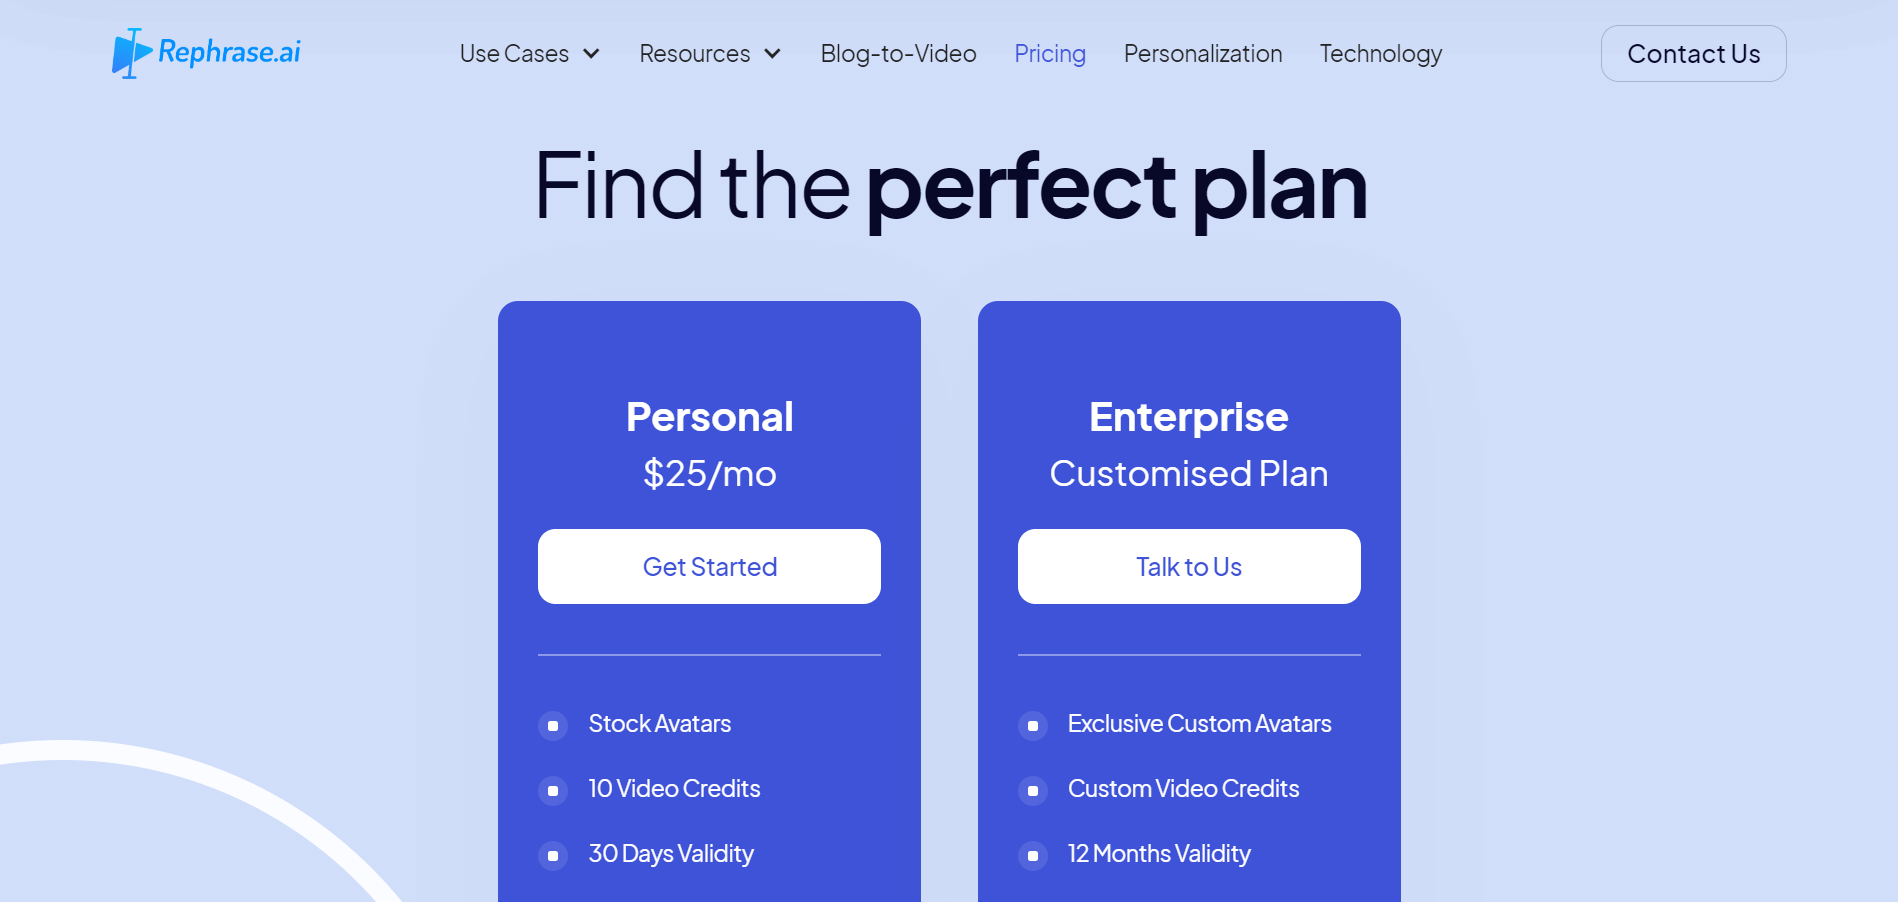 Rephrase's pricing plans